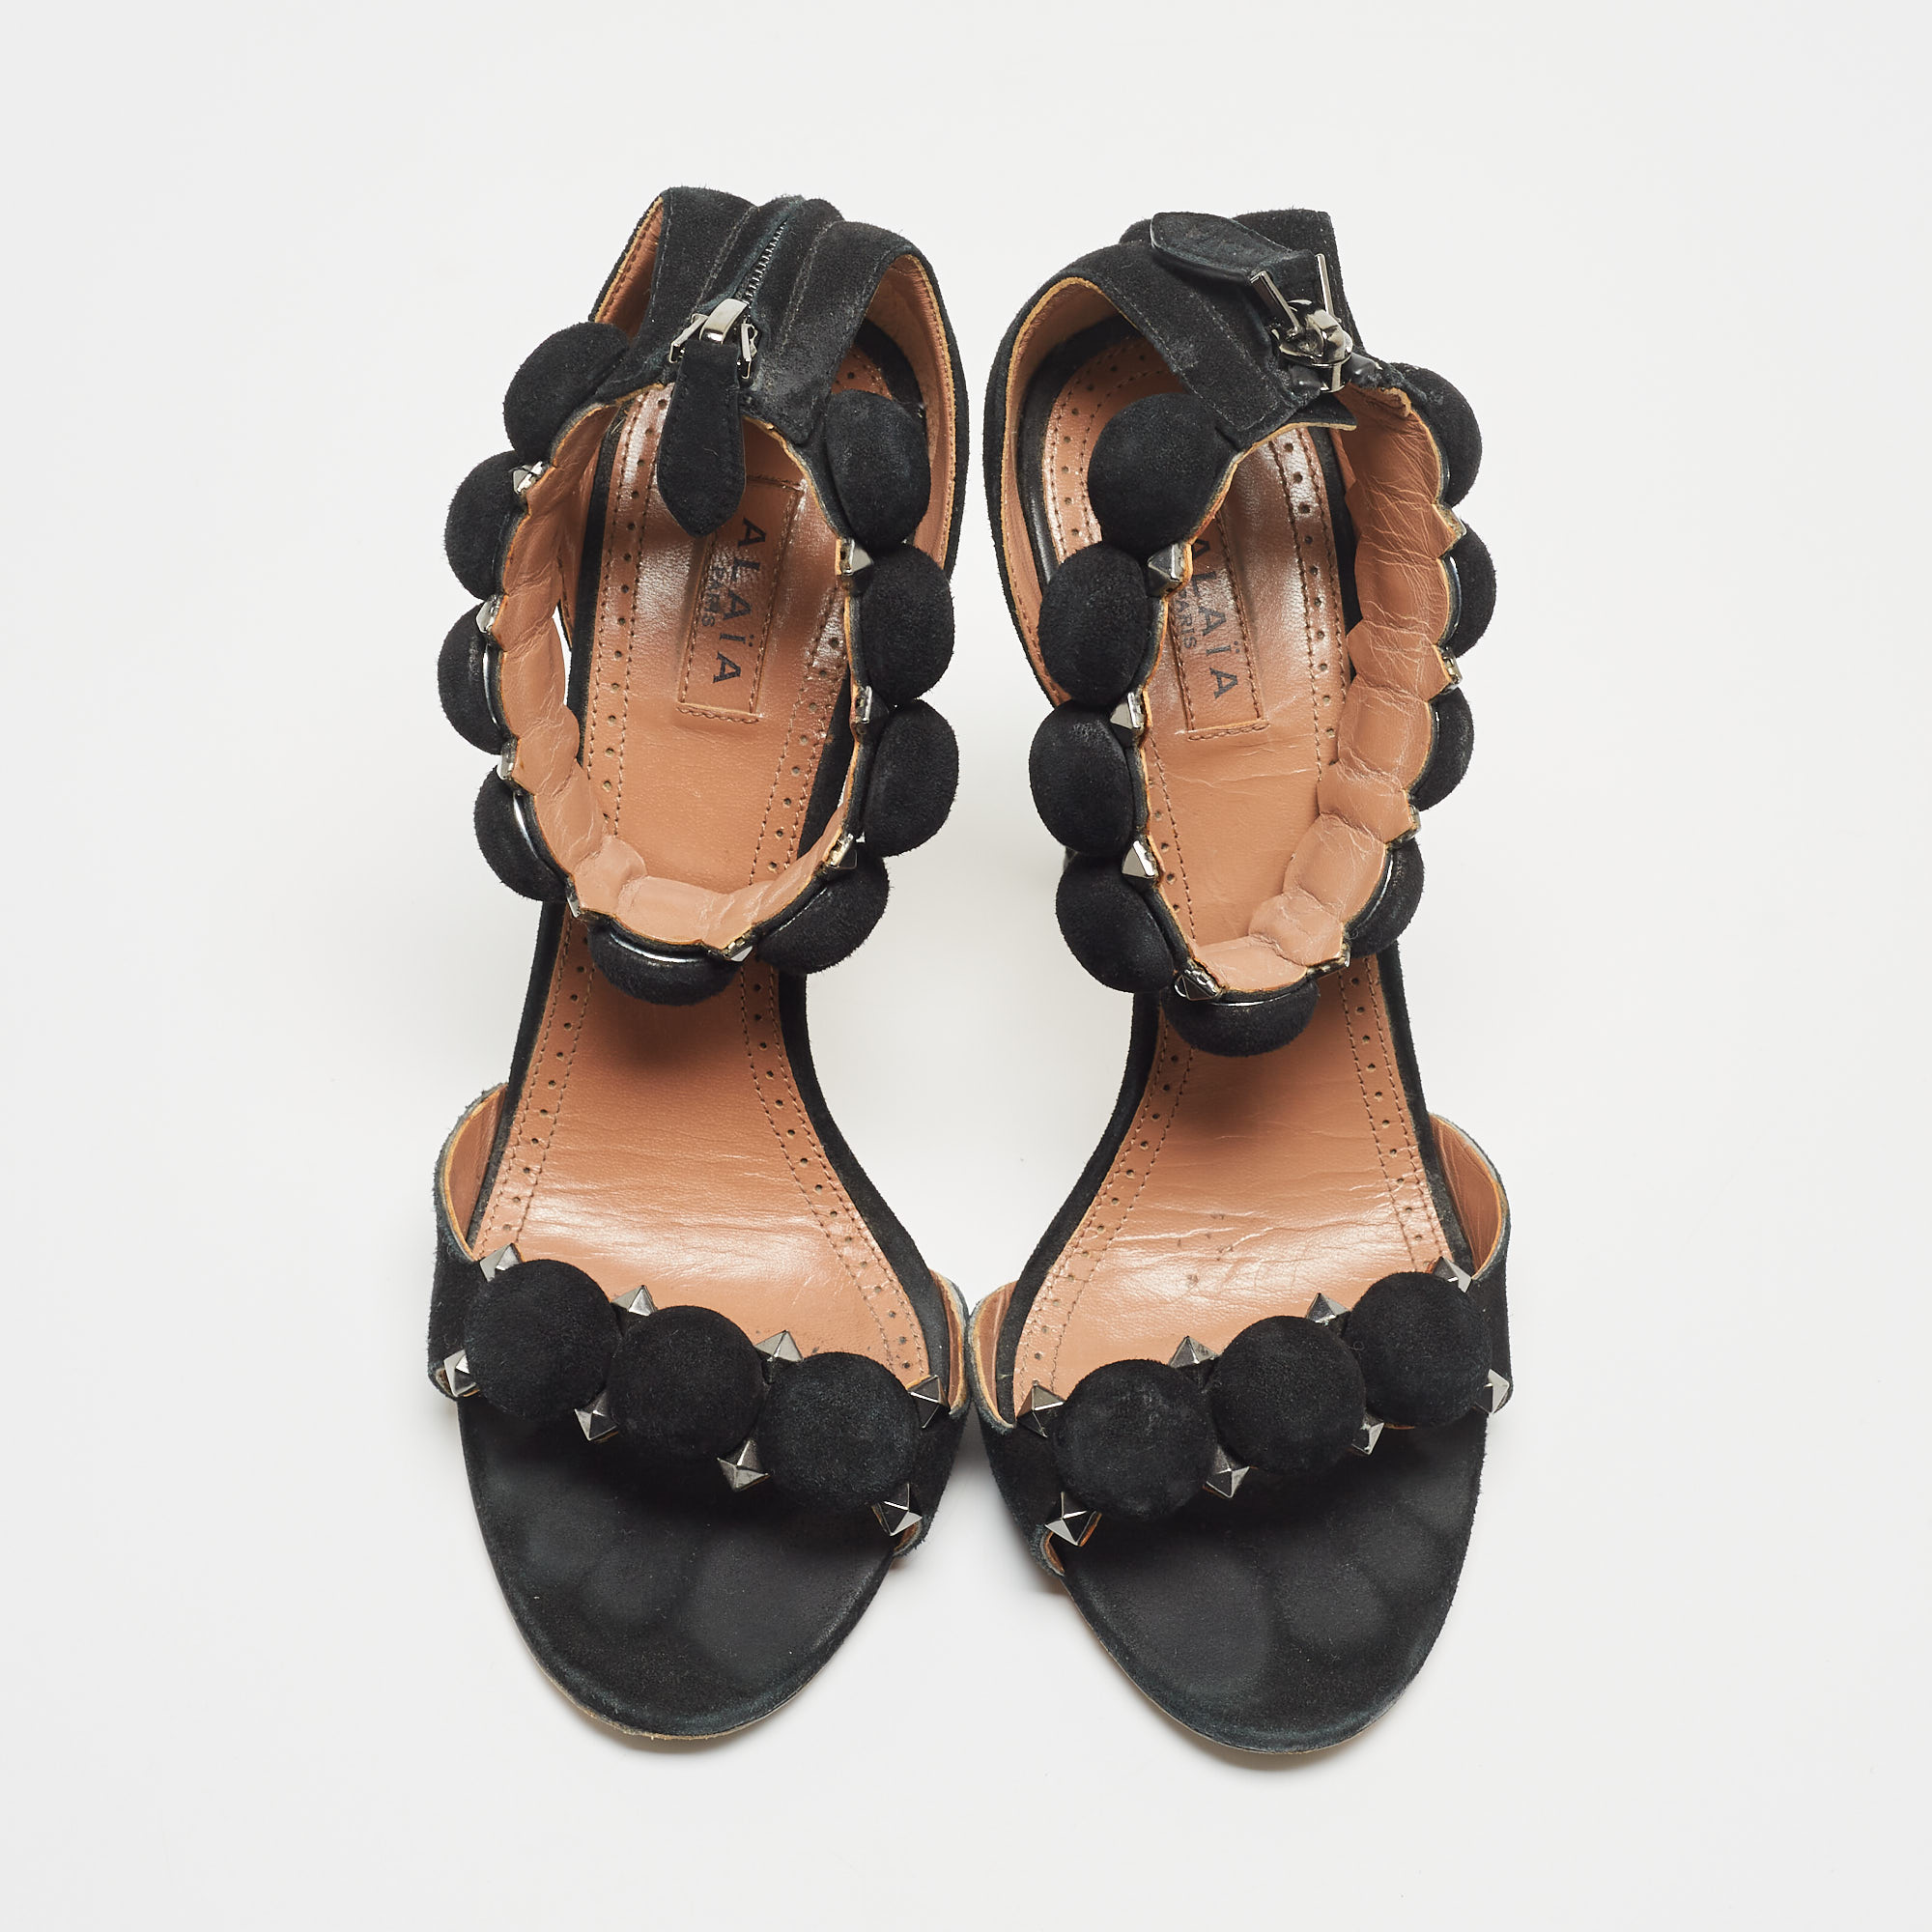 Alaia Black Suede Bombe Ankle Strap Sandals Size